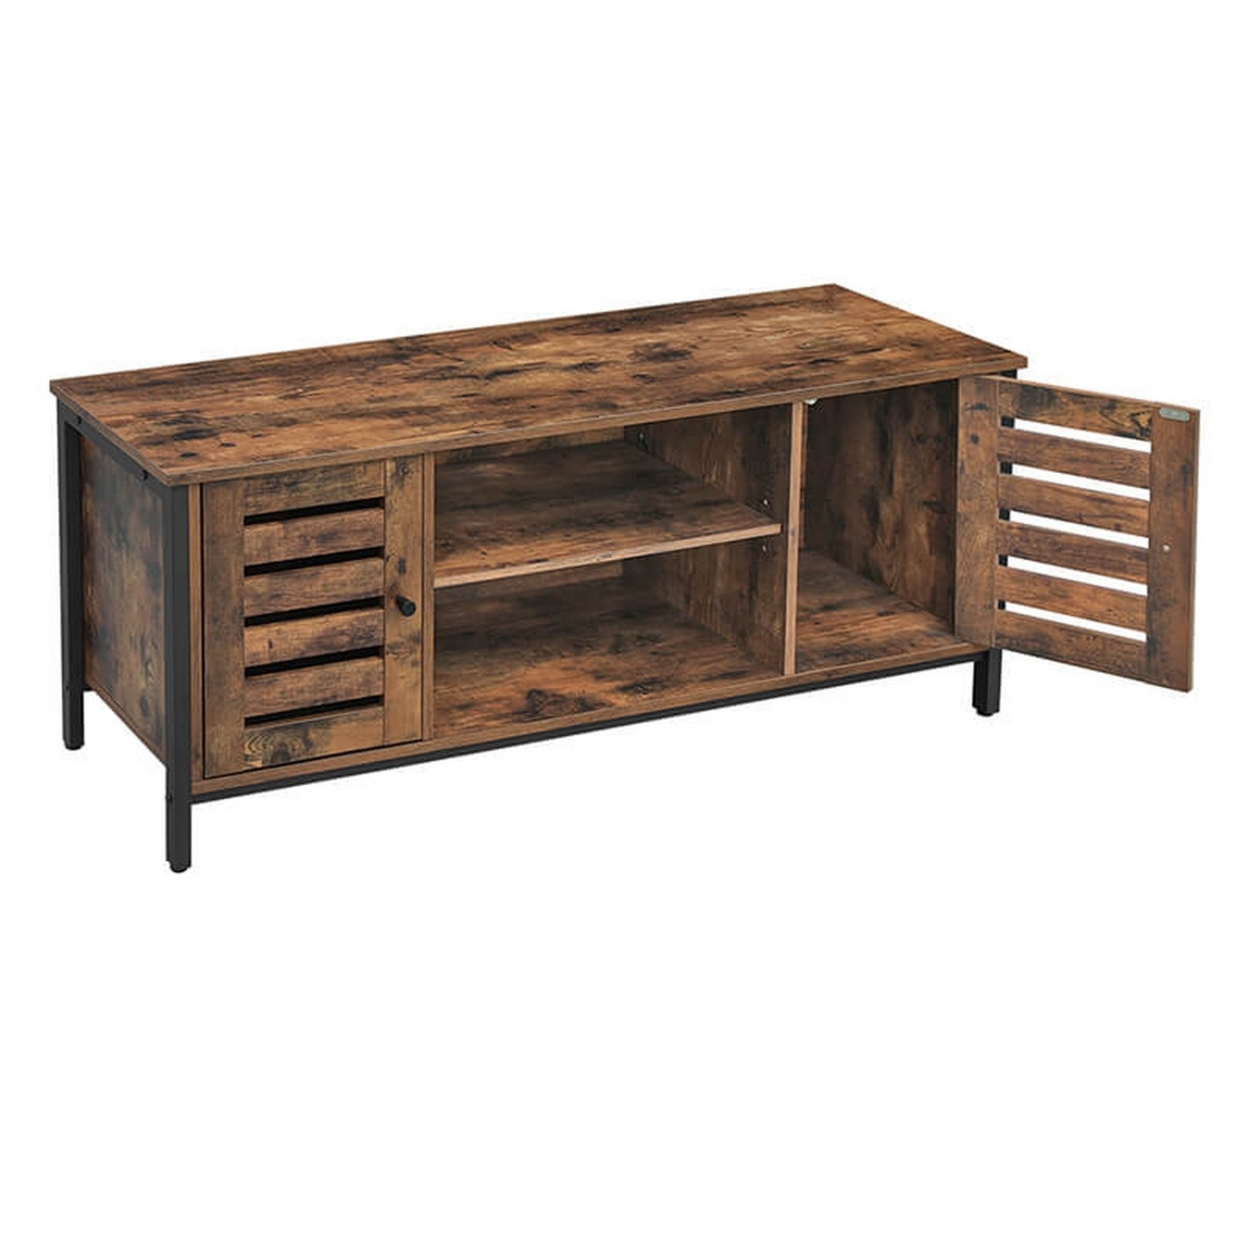 50 Inches Wooden TV Stand With 2 Louvered Doors, Brown And Black- Saltoro Sherpi